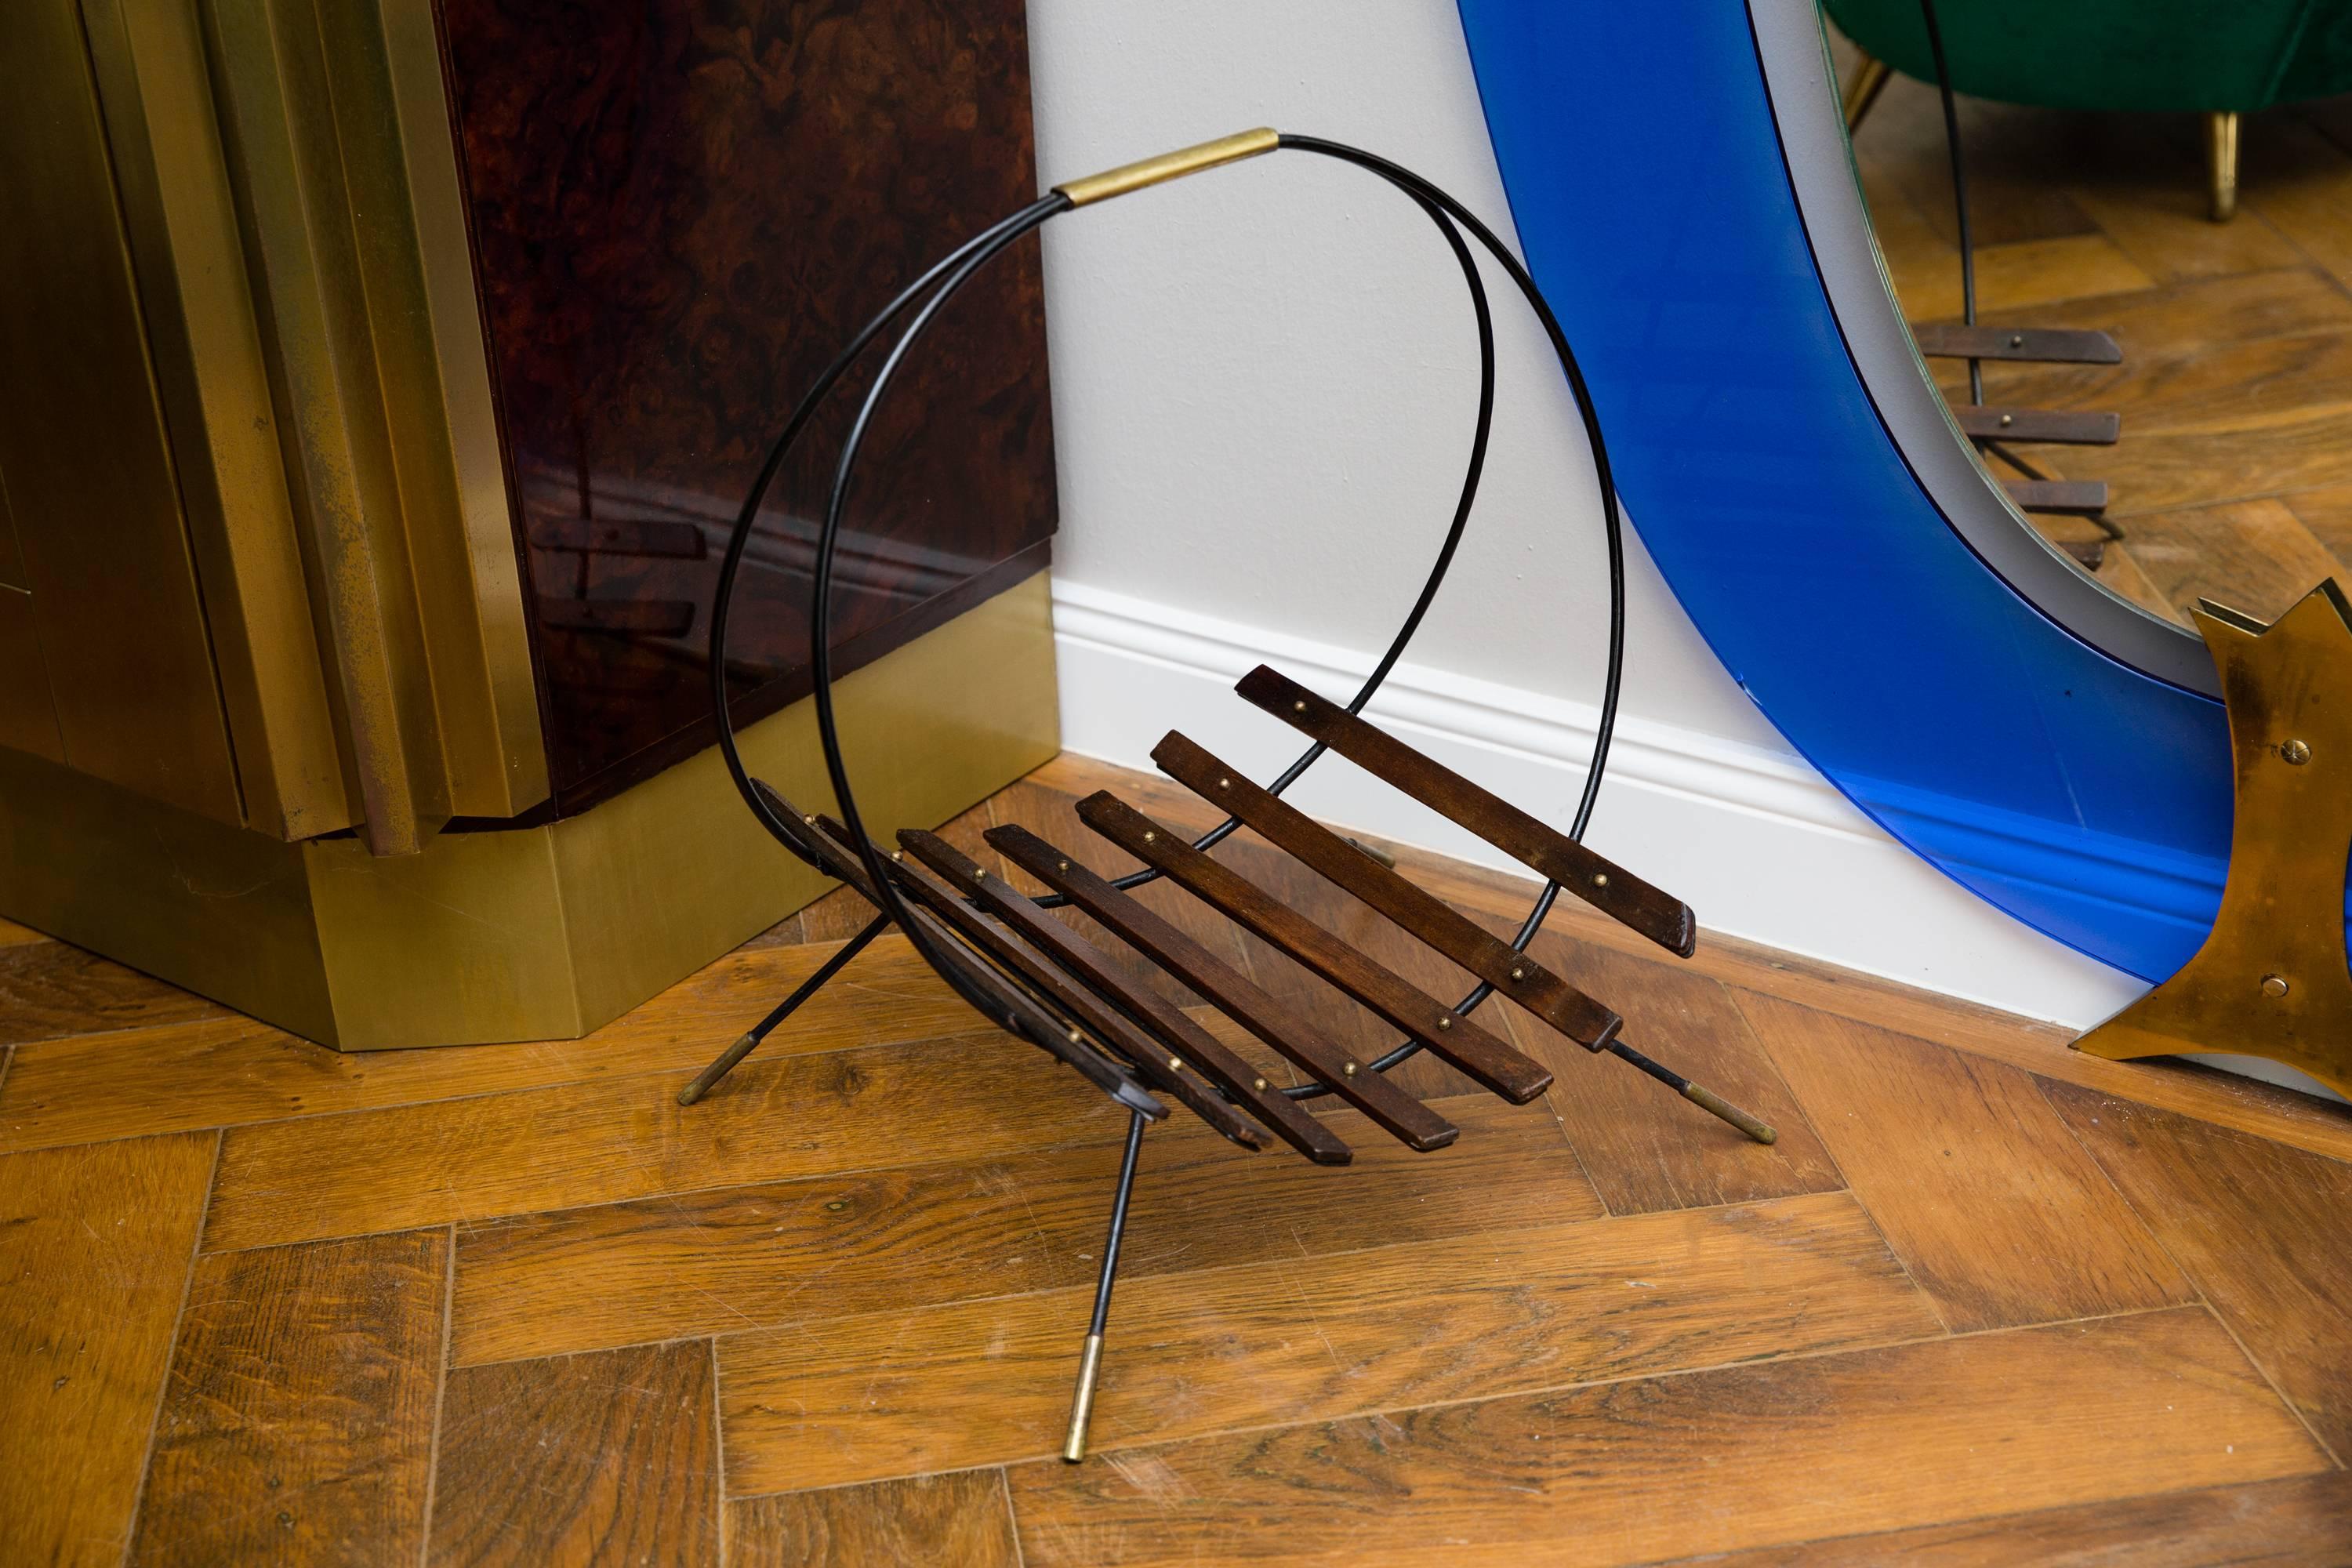 Elegant magazine or firewood rack, Austria circa 1950, black lacquered metal with brass feet, brass handle, mounted wood sticks fixed with small brass balls, restored.